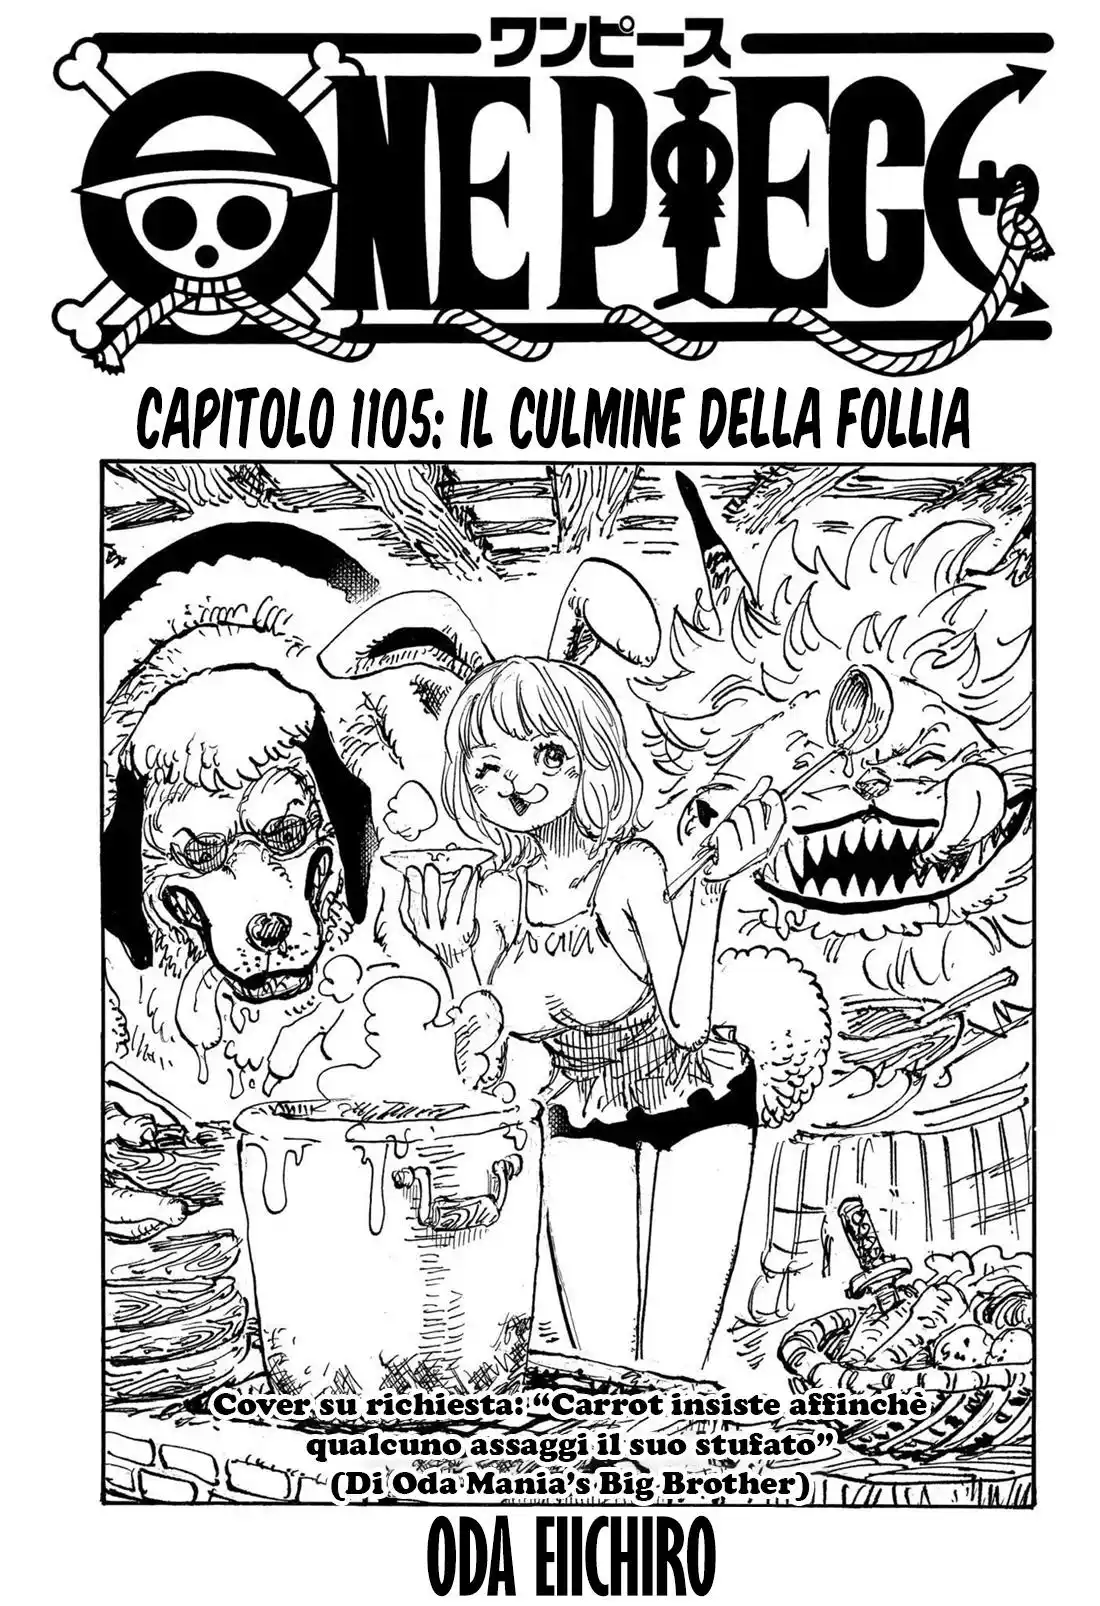 One Piece Capitolo 1105 page 2